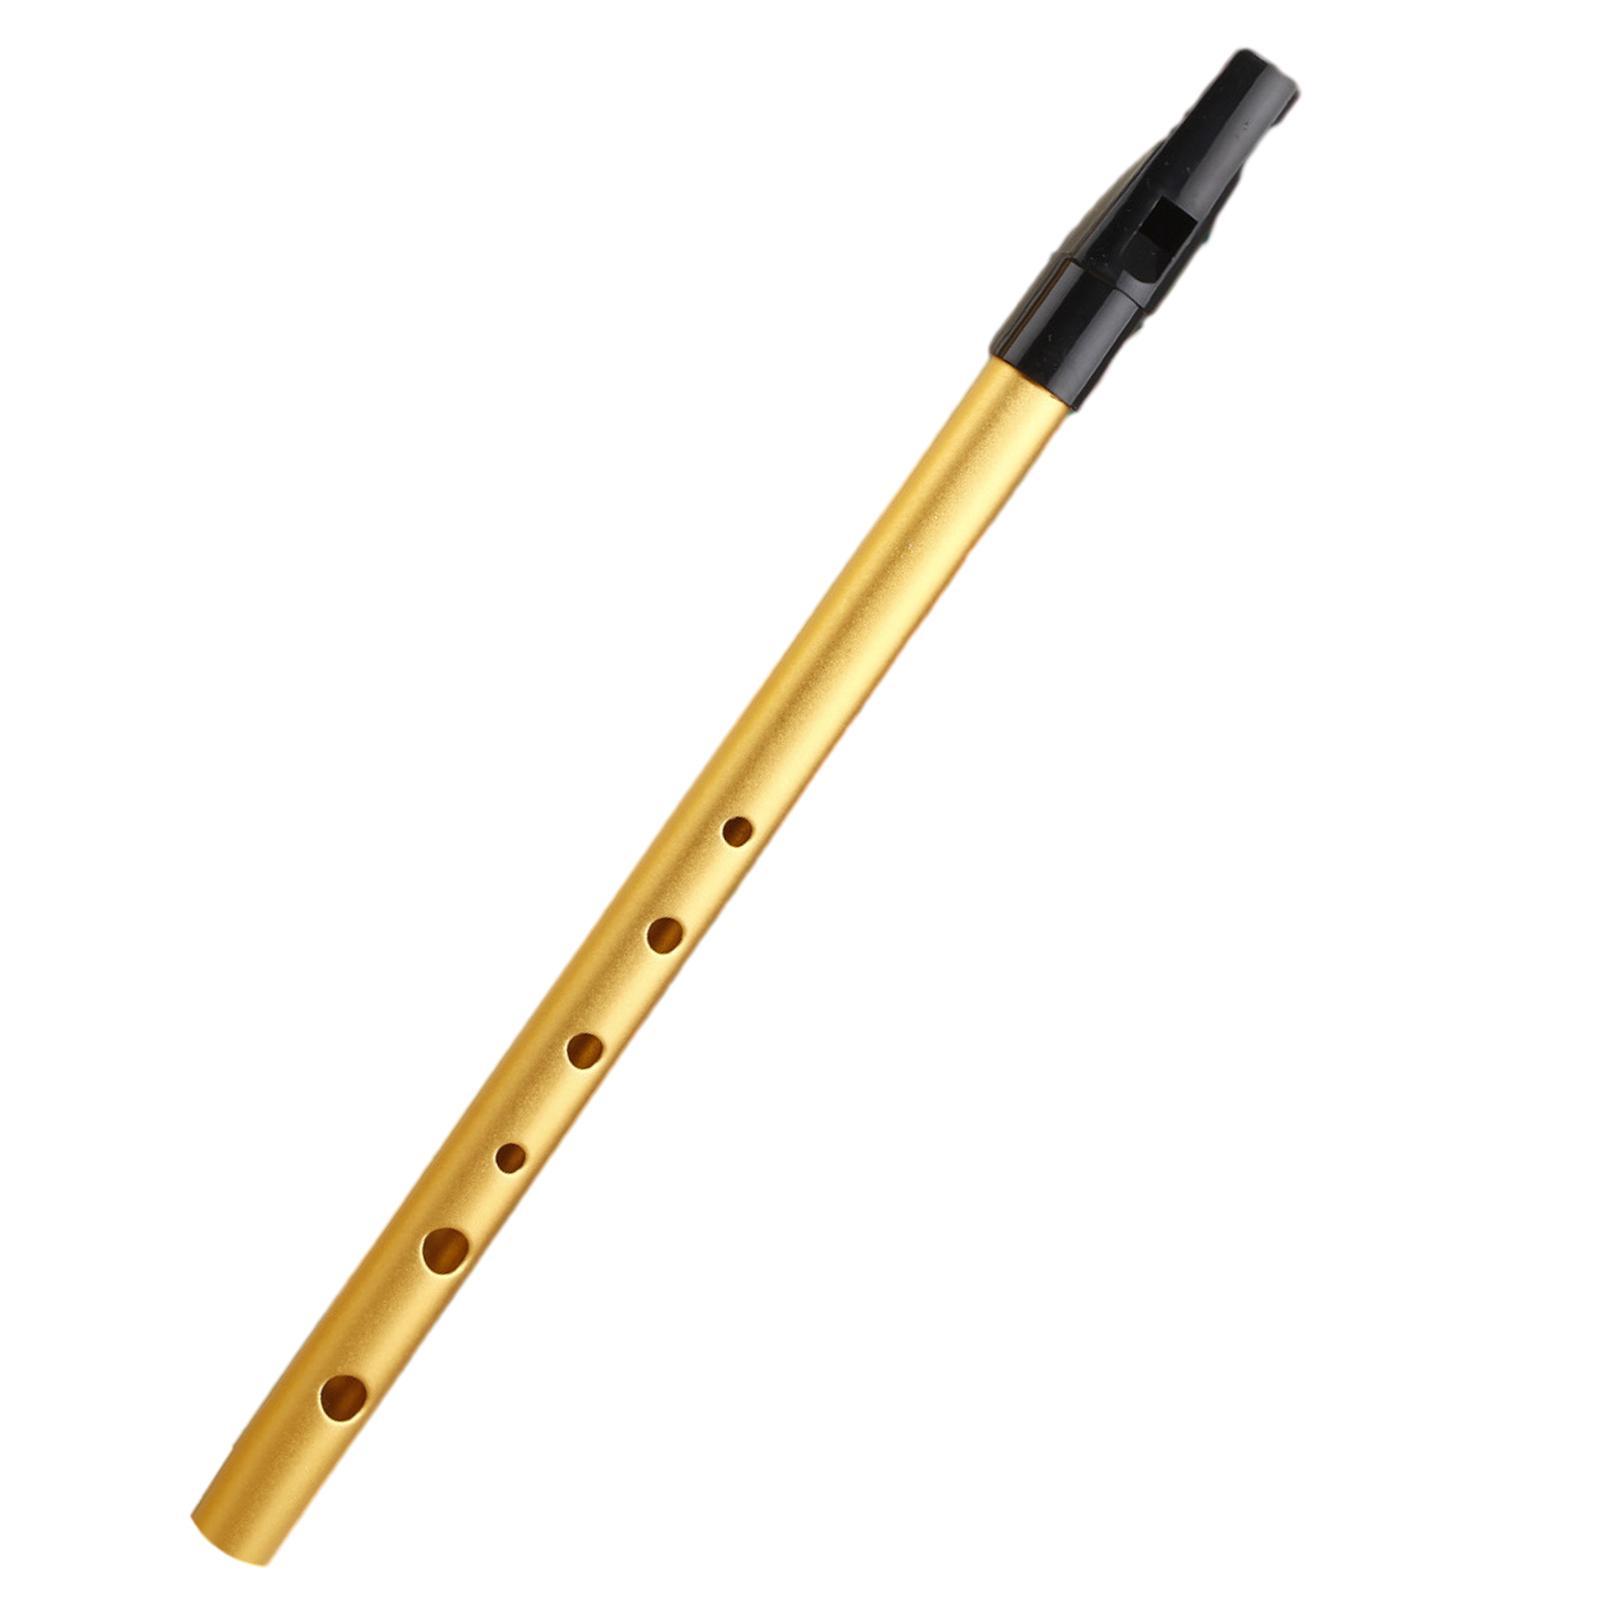 Whistle, Portable 6 Hole Piccolo Musical, Traditional Durable Flute Easy to Learn Fipple, Whistle Key of C for Kids, Beginners, Music Lovers Gift